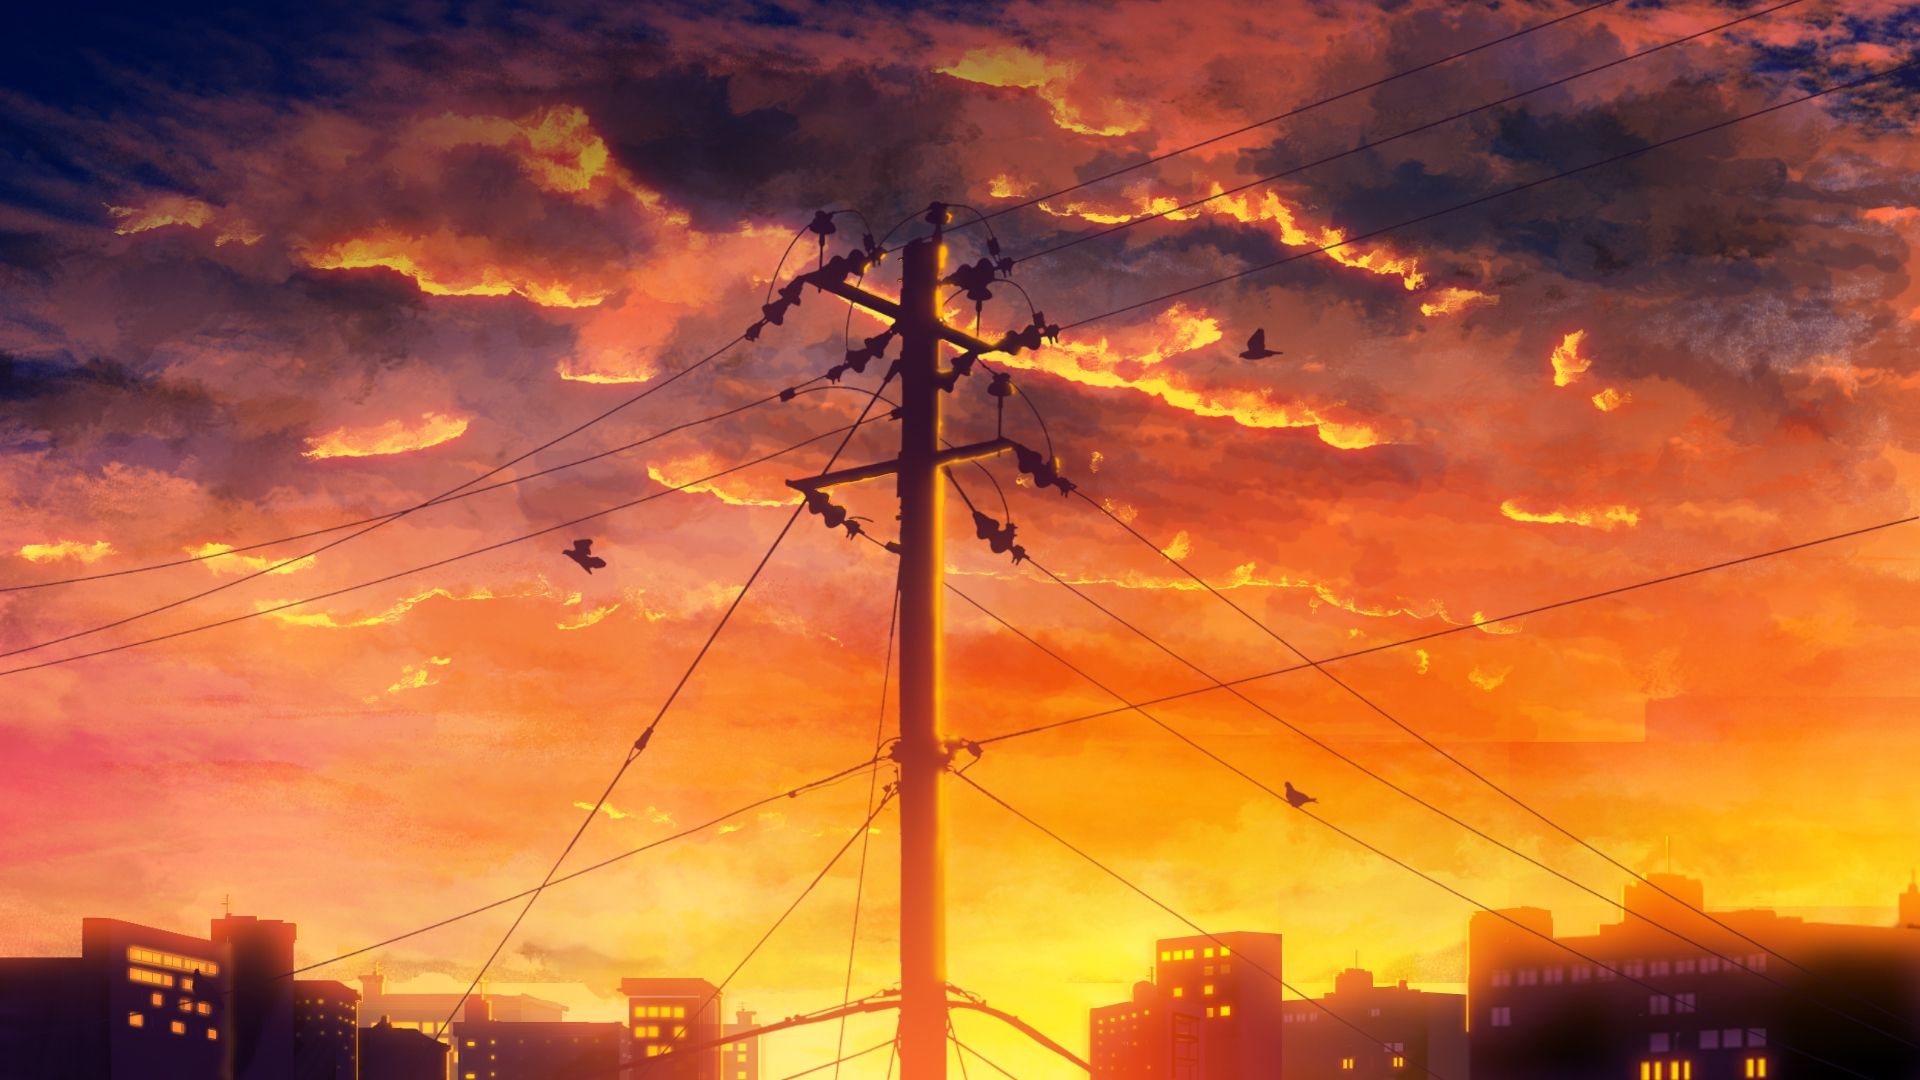 Sunset over the city wallpaper - 1920x1080 - (#16554) - High Quality and ... - Anime sunset